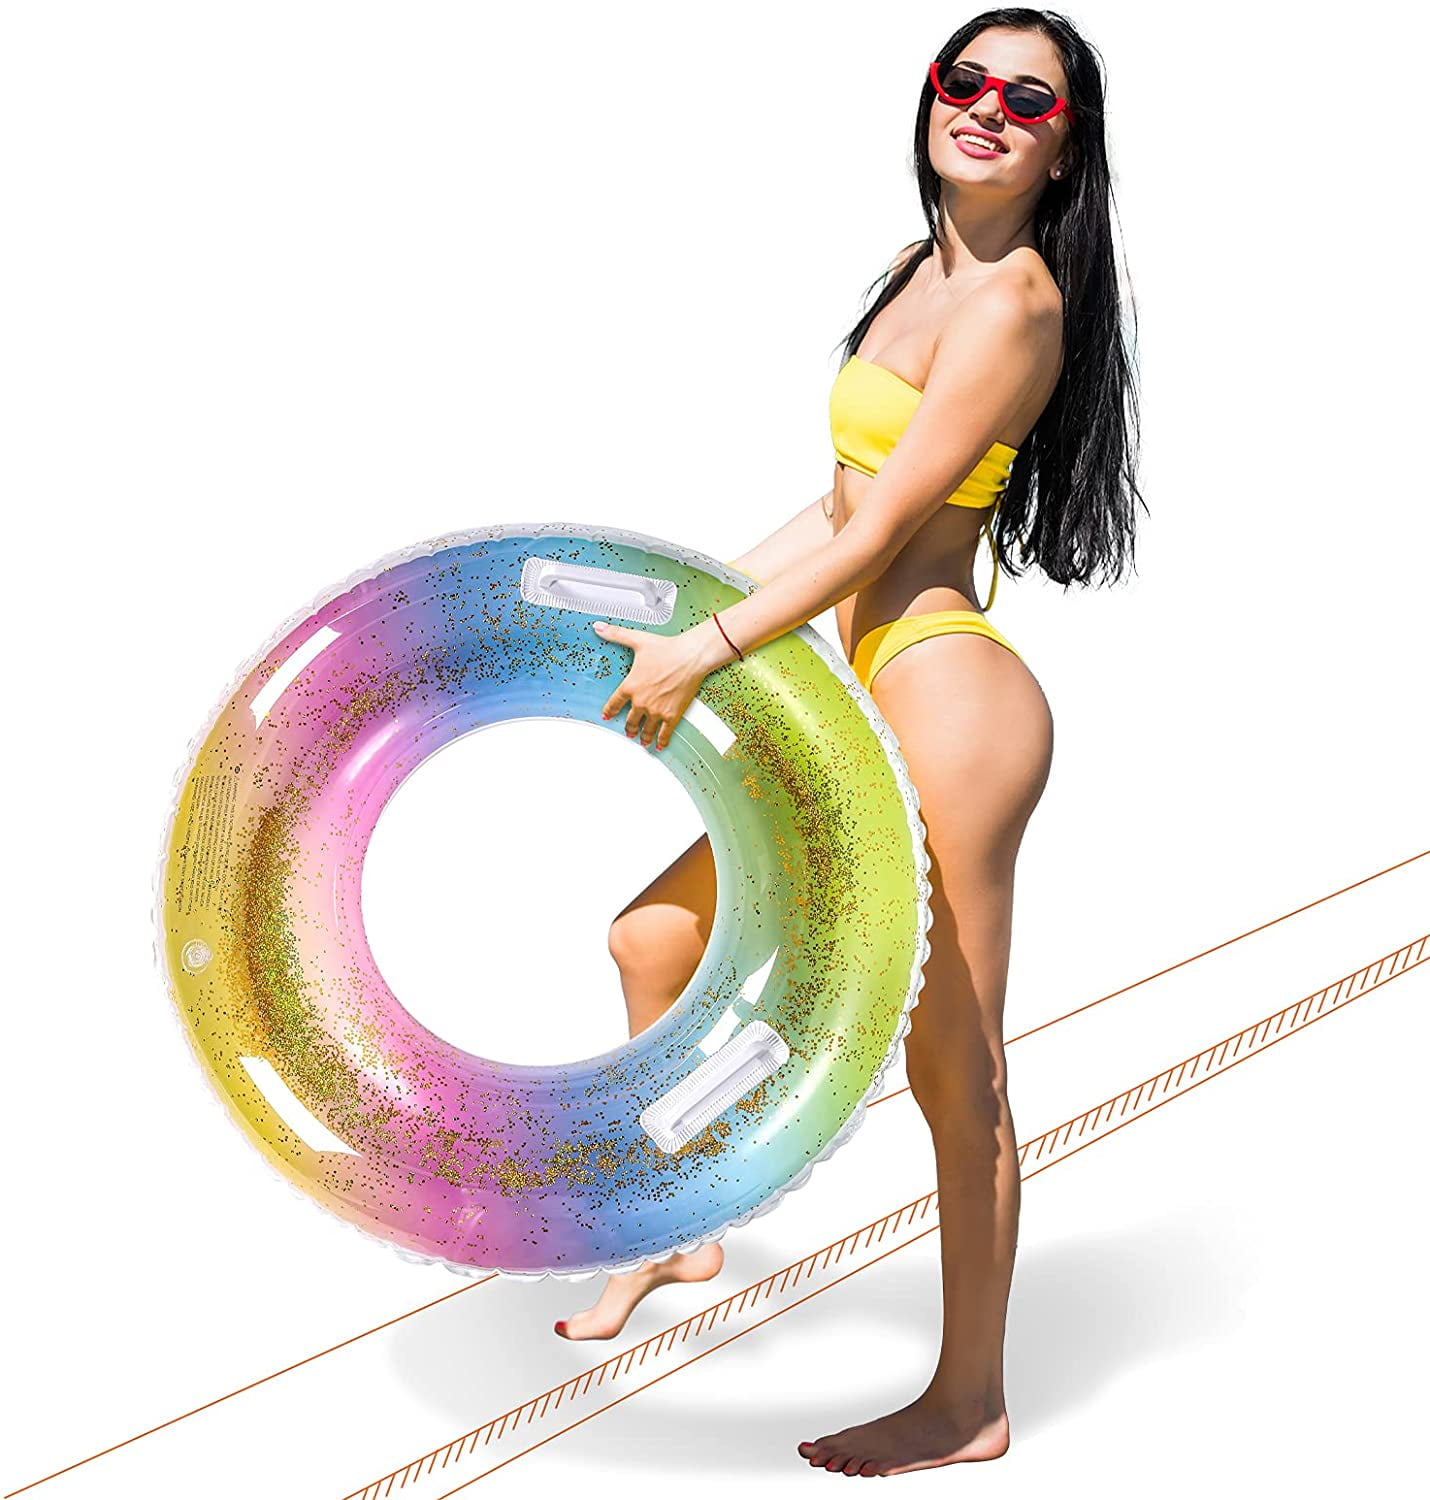 Jree Ash Colorful Pool Floats 32.5 Rainbow Inflatable Pool Tube for Adults and Kids,Pool Float Toys Swim Ring for Swimming Pool Party Decorations 